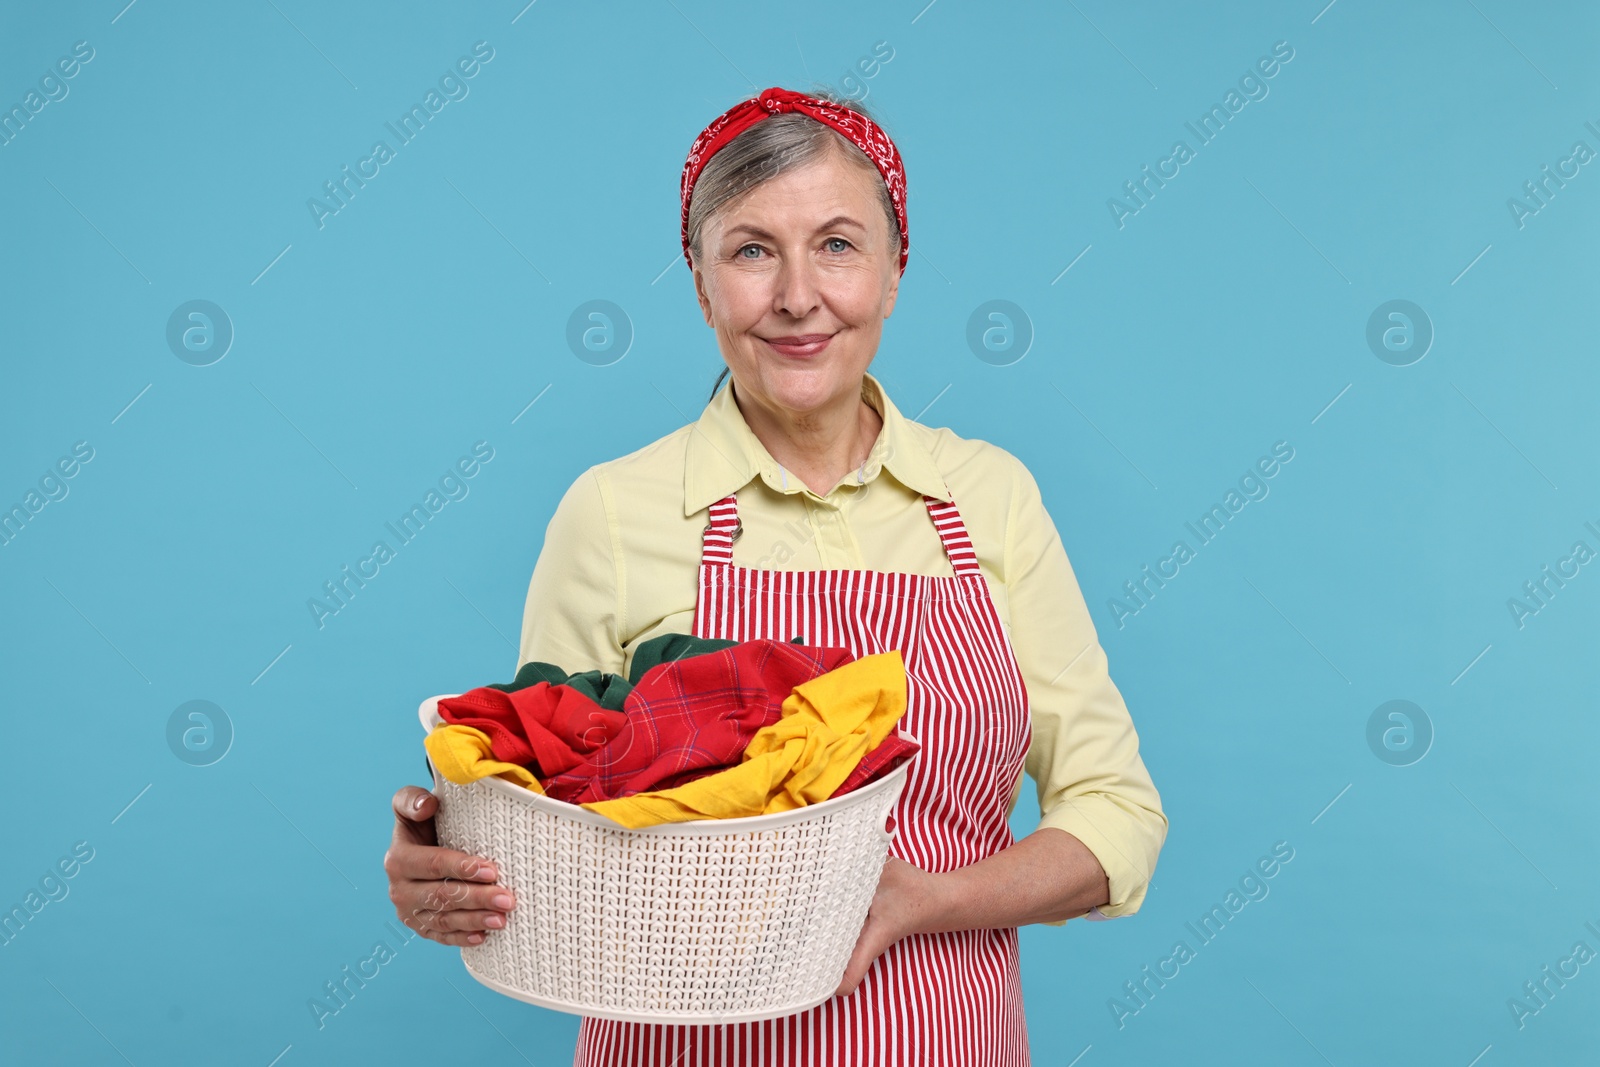 Photo of Happy housewife with basket full of laundry on light blue background